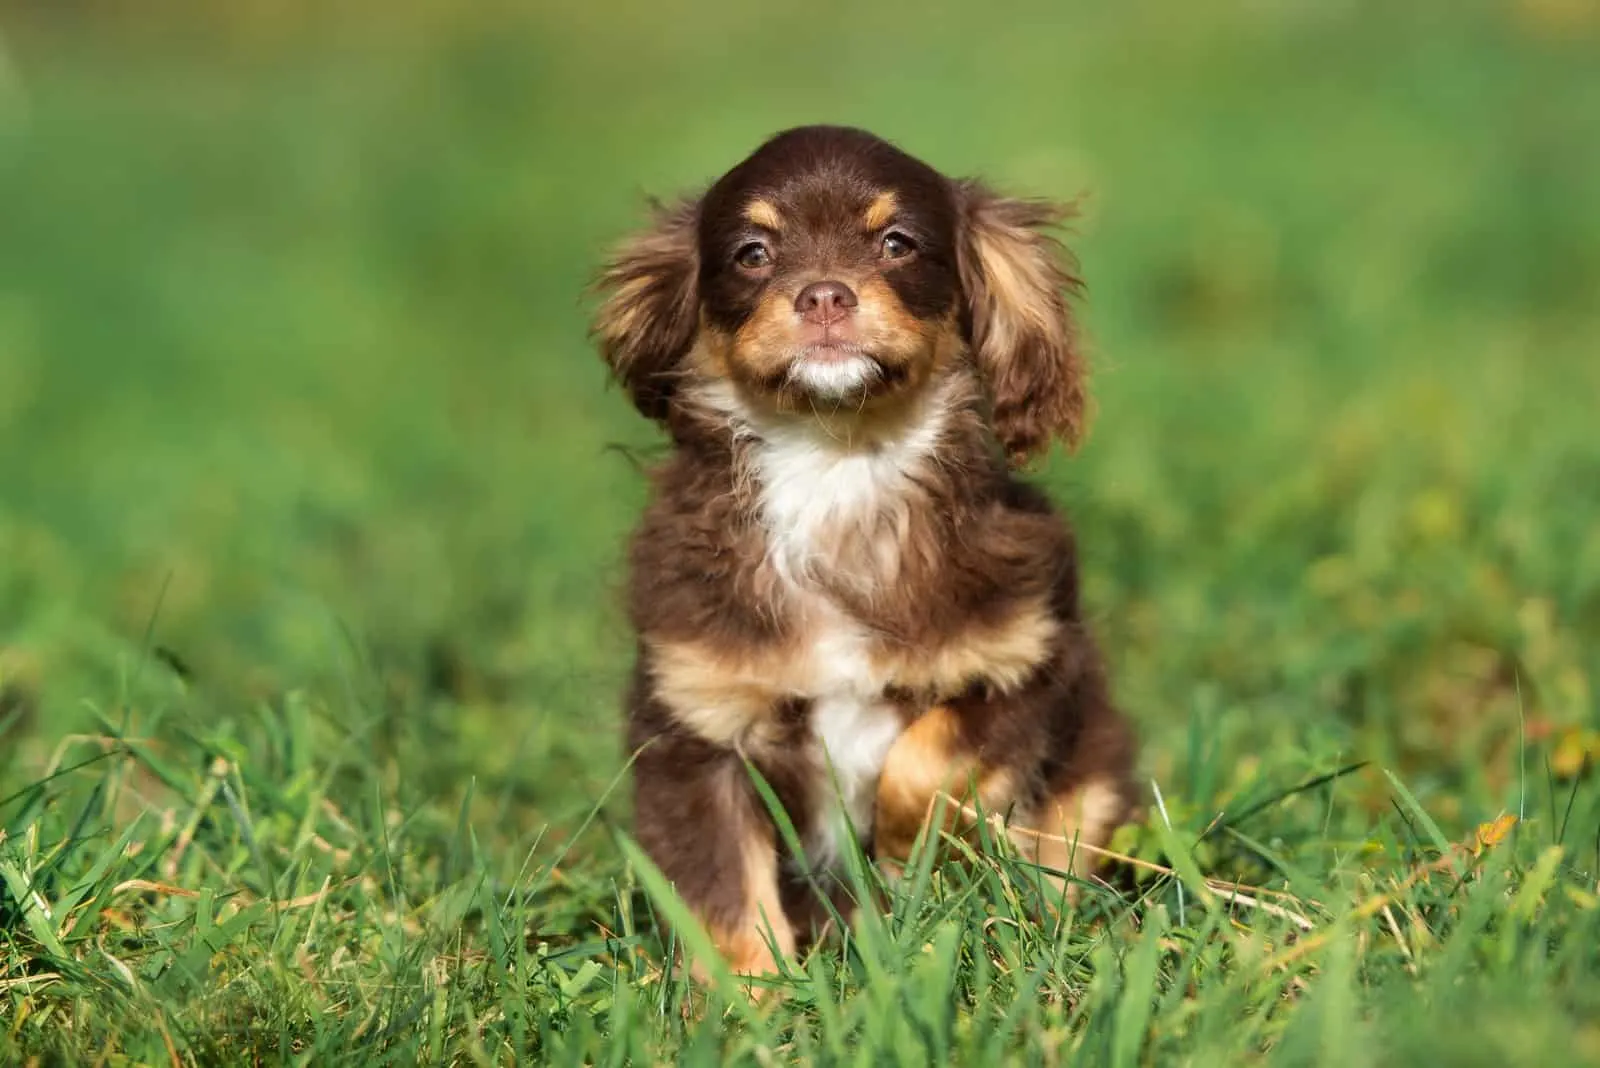 The Cavalier King Charles Spaniel sits in the grass